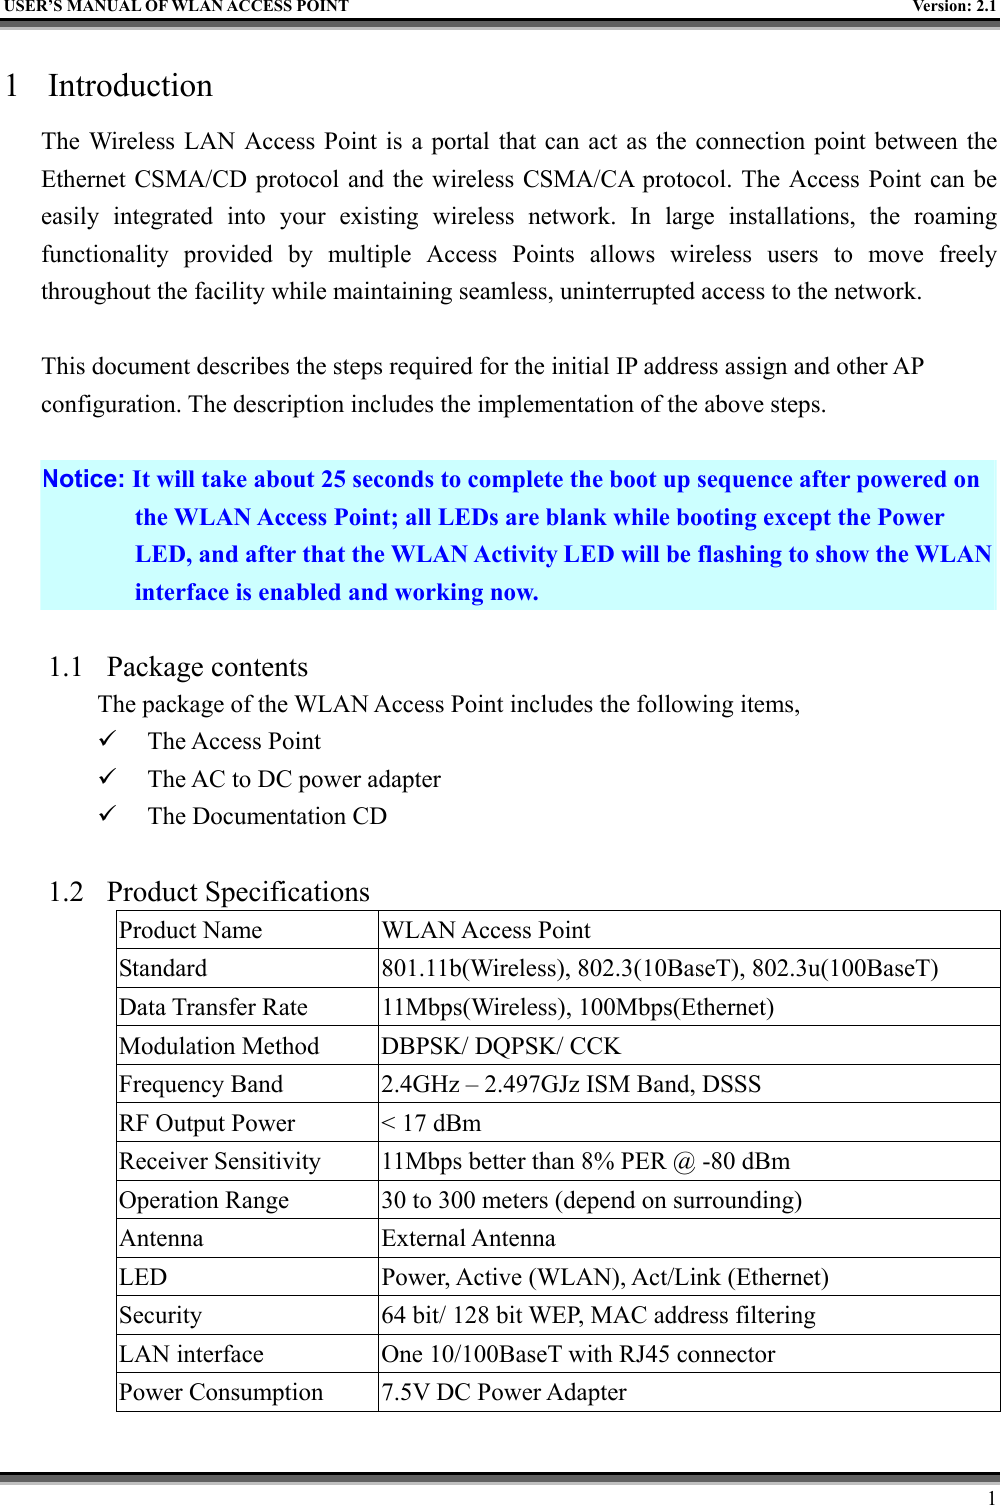   USER’S MANUAL OF WLAN ACCESS POINT    Version: 2.1     1 1 Introduction The Wireless LAN Access Point is a portal that can act as the connection point between the Ethernet CSMA/CD protocol and the wireless CSMA/CA protocol. The Access Point can be easily integrated into your existing wireless network. In large installations, the roaming functionality provided by multiple Access Points allows wireless users to move freely throughout the facility while maintaining seamless, uninterrupted access to the network.  This document describes the steps required for the initial IP address assign and other AP configuration. The description includes the implementation of the above steps.  Notice: It will take about 25 seconds to complete the boot up sequence after powered on the WLAN Access Point; all LEDs are blank while booting except the Power LED, and after that the WLAN Activity LED will be flashing to show the WLAN interface is enabled and working now.  1.1 Package contents The package of the WLAN Access Point includes the following items,   The Access Point   The AC to DC power adapter   The Documentation CD  1.2 Product Specifications Product Name  WLAN Access Point Standard  801.11b(Wireless), 802.3(10BaseT), 802.3u(100BaseT) Data Transfer Rate  11Mbps(Wireless), 100Mbps(Ethernet) Modulation Method  DBPSK/ DQPSK/ CCK Frequency Band  2.4GHz – 2.497GJz ISM Band, DSSS RF Output Power  &lt; 17 dBm Receiver Sensitivity  11Mbps better than 8% PER @ -80 dBm Operation Range  30 to 300 meters (depend on surrounding) Antenna External Antenna LED  Power, Active (WLAN), Act/Link (Ethernet) Security  64 bit/ 128 bit WEP, MAC address filtering LAN interface  One 10/100BaseT with RJ45 connector Power Consumption  7.5V DC Power Adapter 